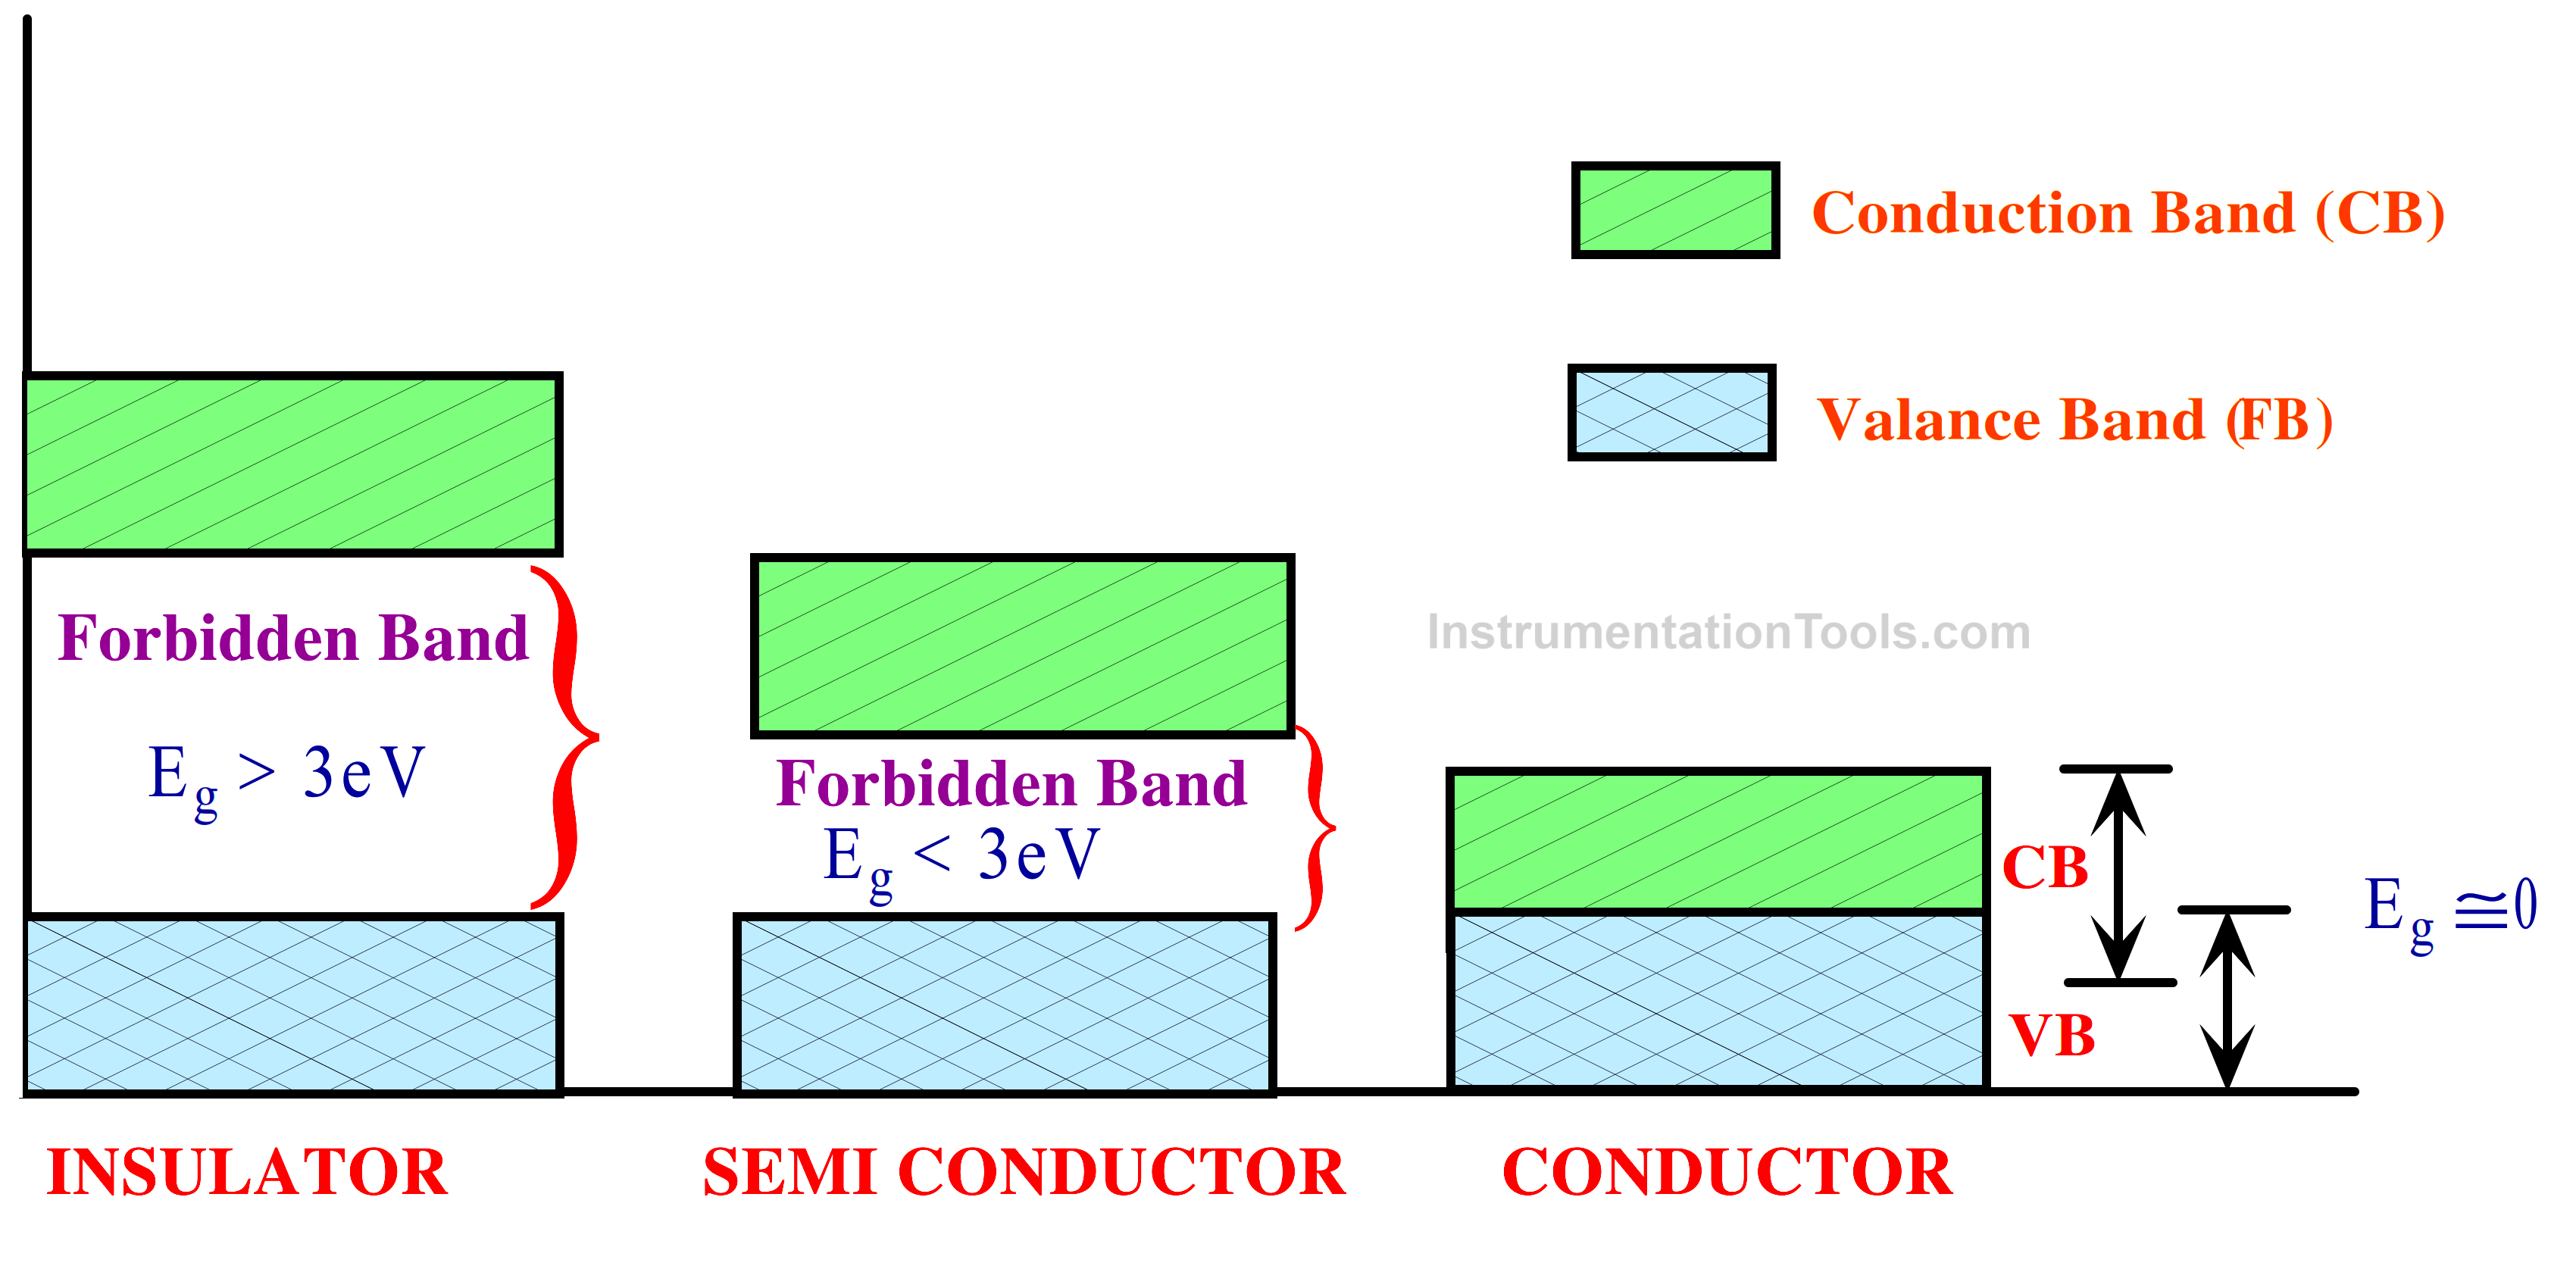 ENERGY BAND OF DIFFERENT MATERIALS